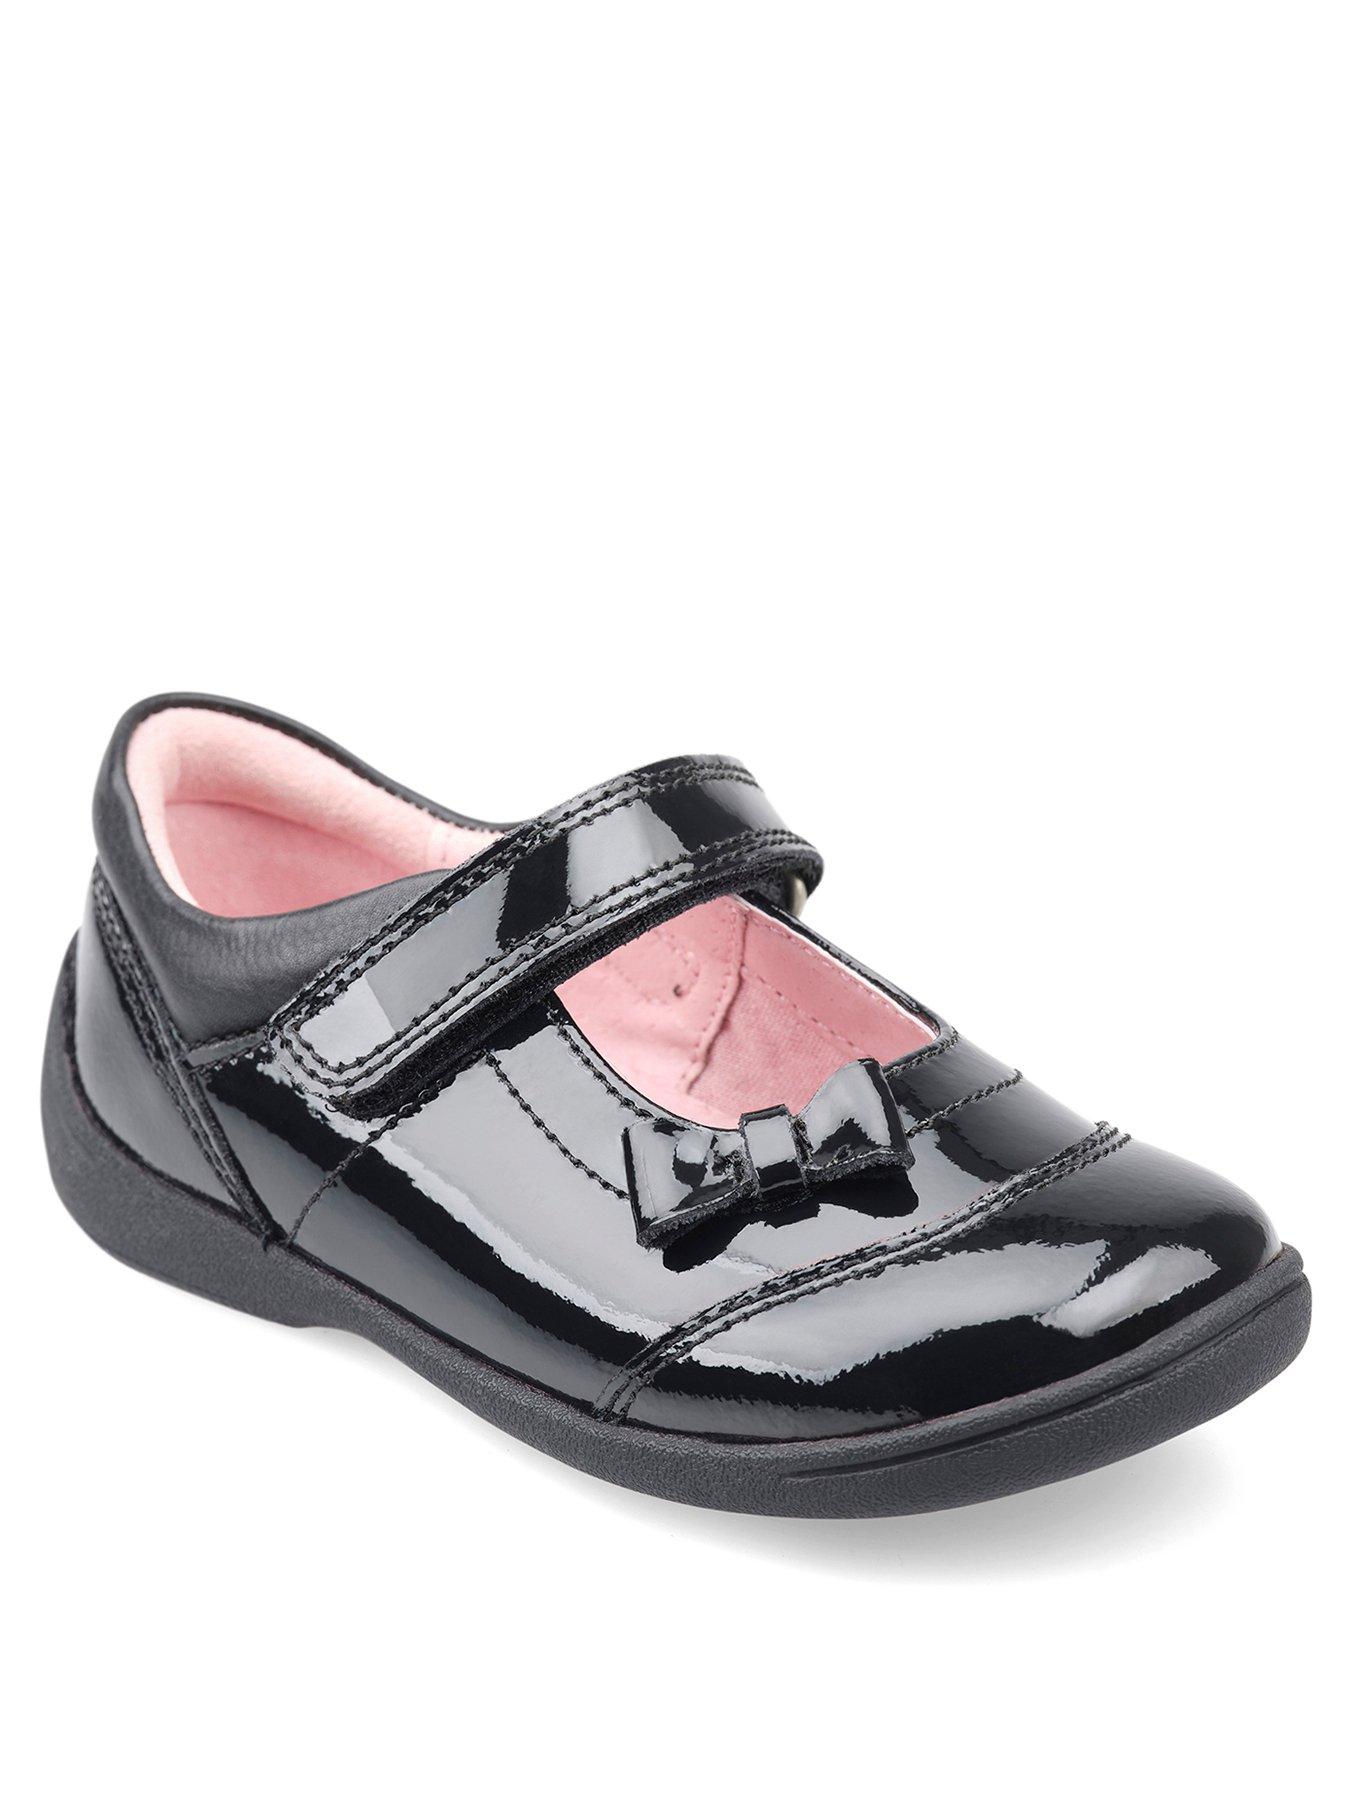  Twizzle Toddler Girls Mary Jane School Shoes - Black Patent